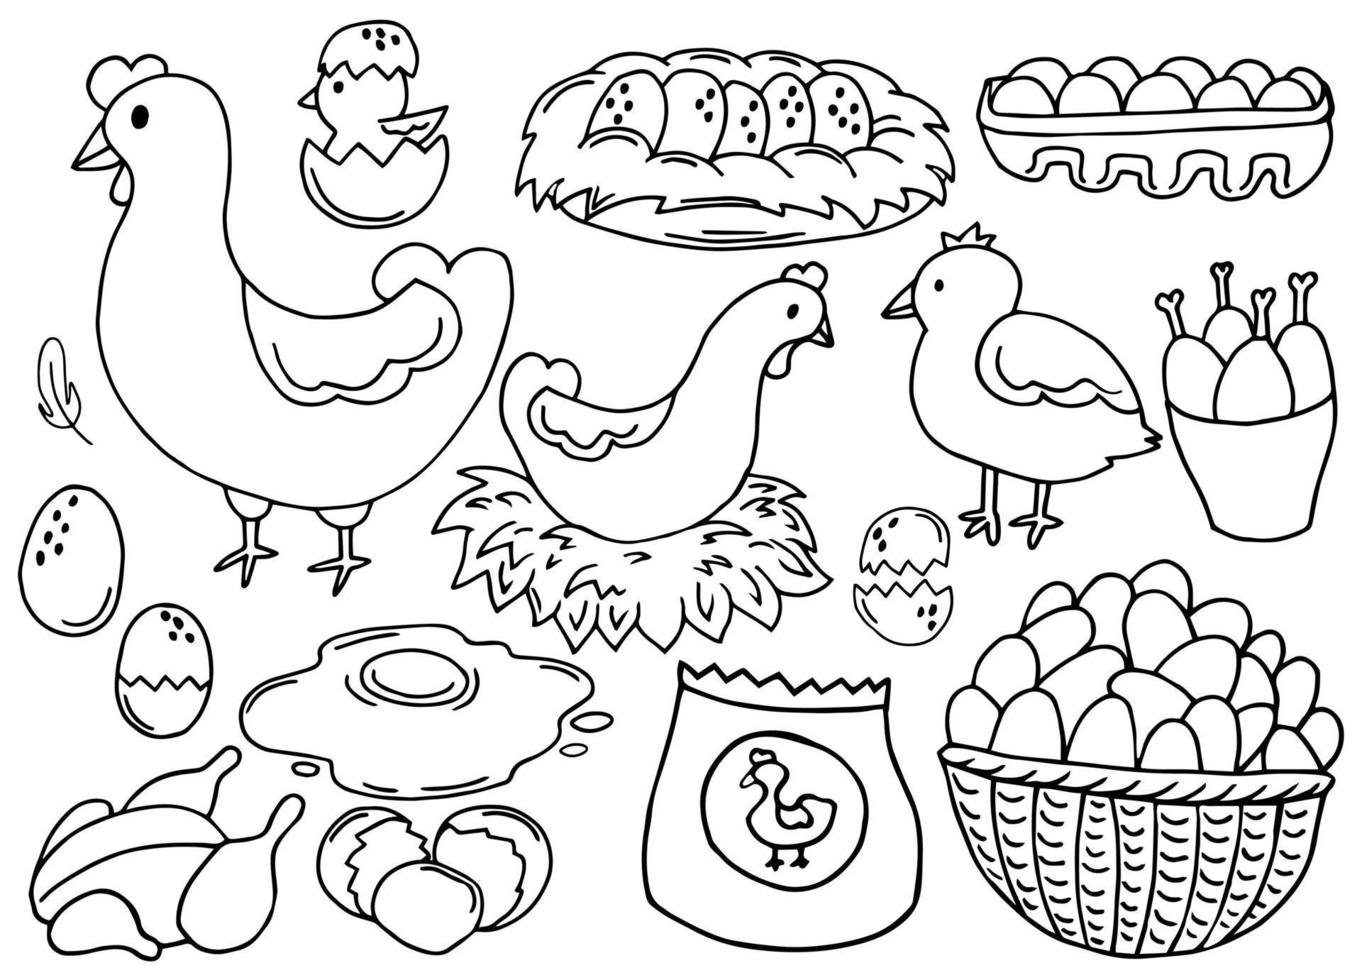 Chicken farm fresh eggs. Vector set of sketch design elements. Hen, poultry and little chicken, isolated on white background. Vector hand drawn vintage engraving illustration for poster.